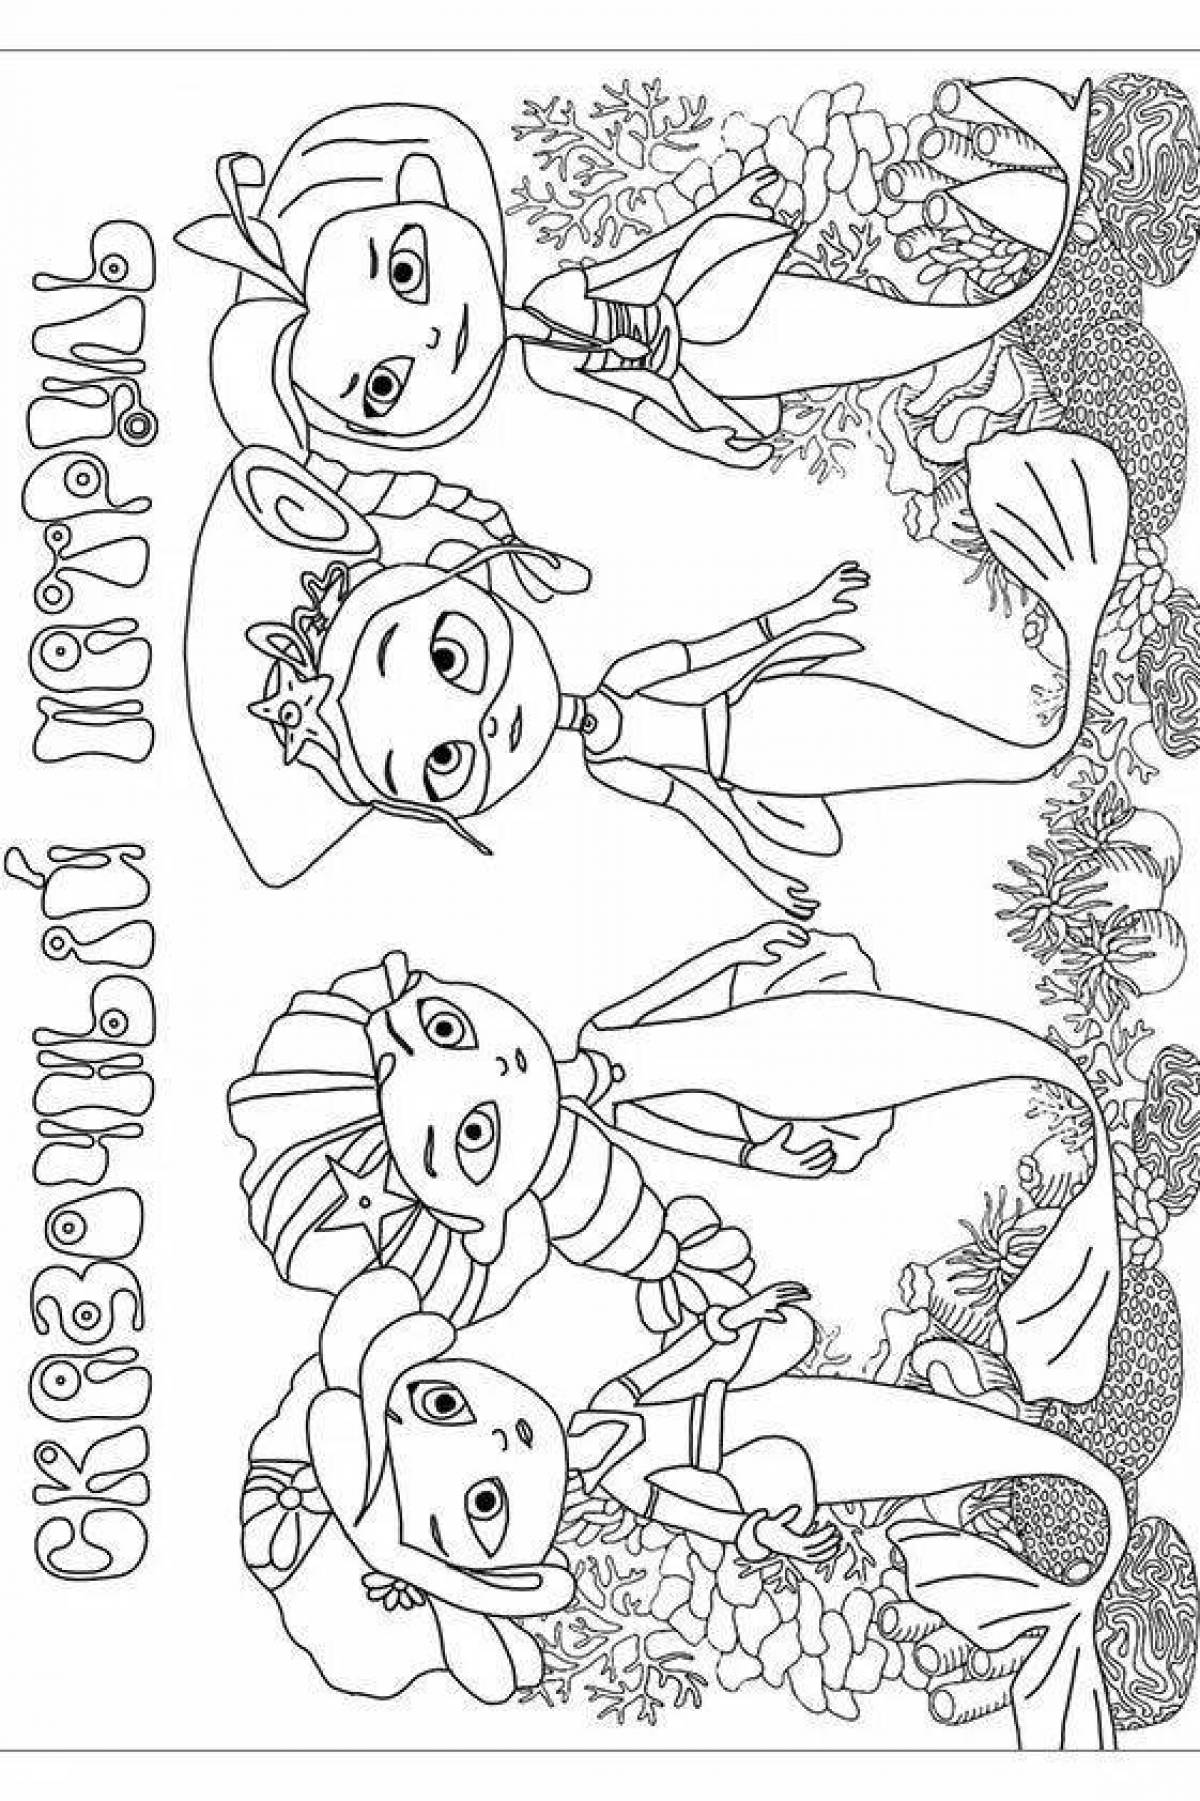 Cute cooking coloring book